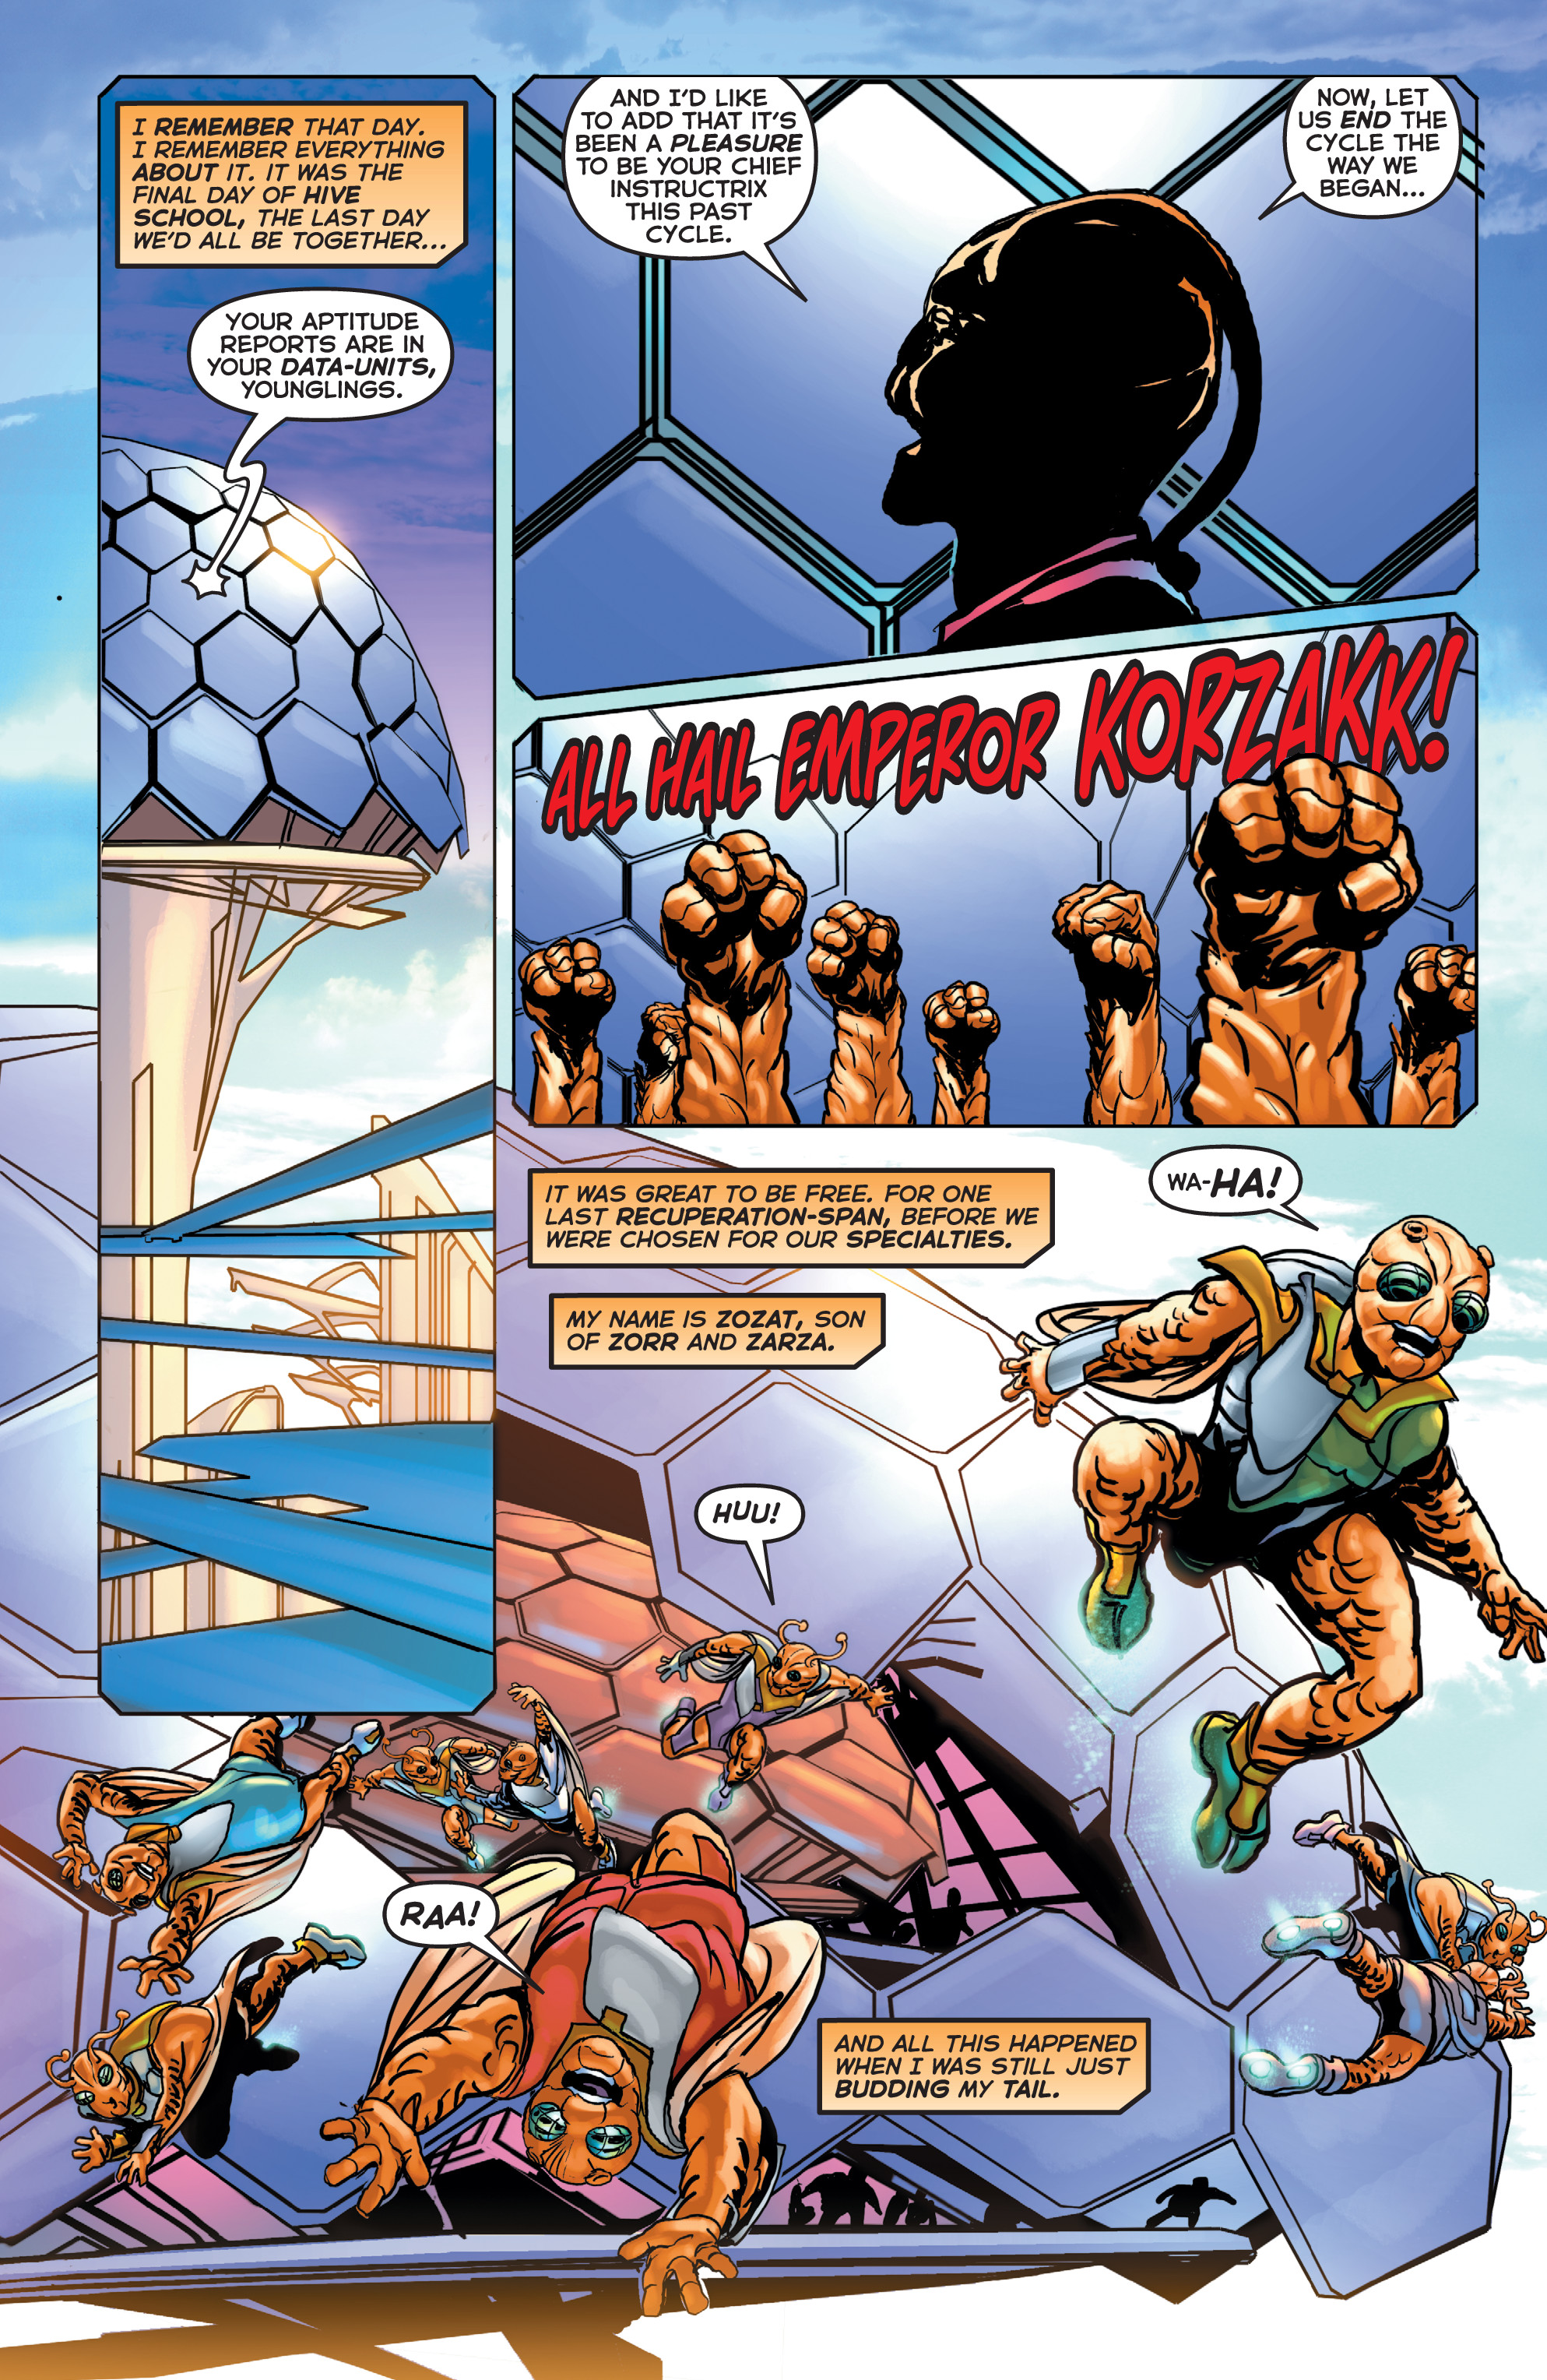 Astro City (2013-): Chapter 29 - Page 2